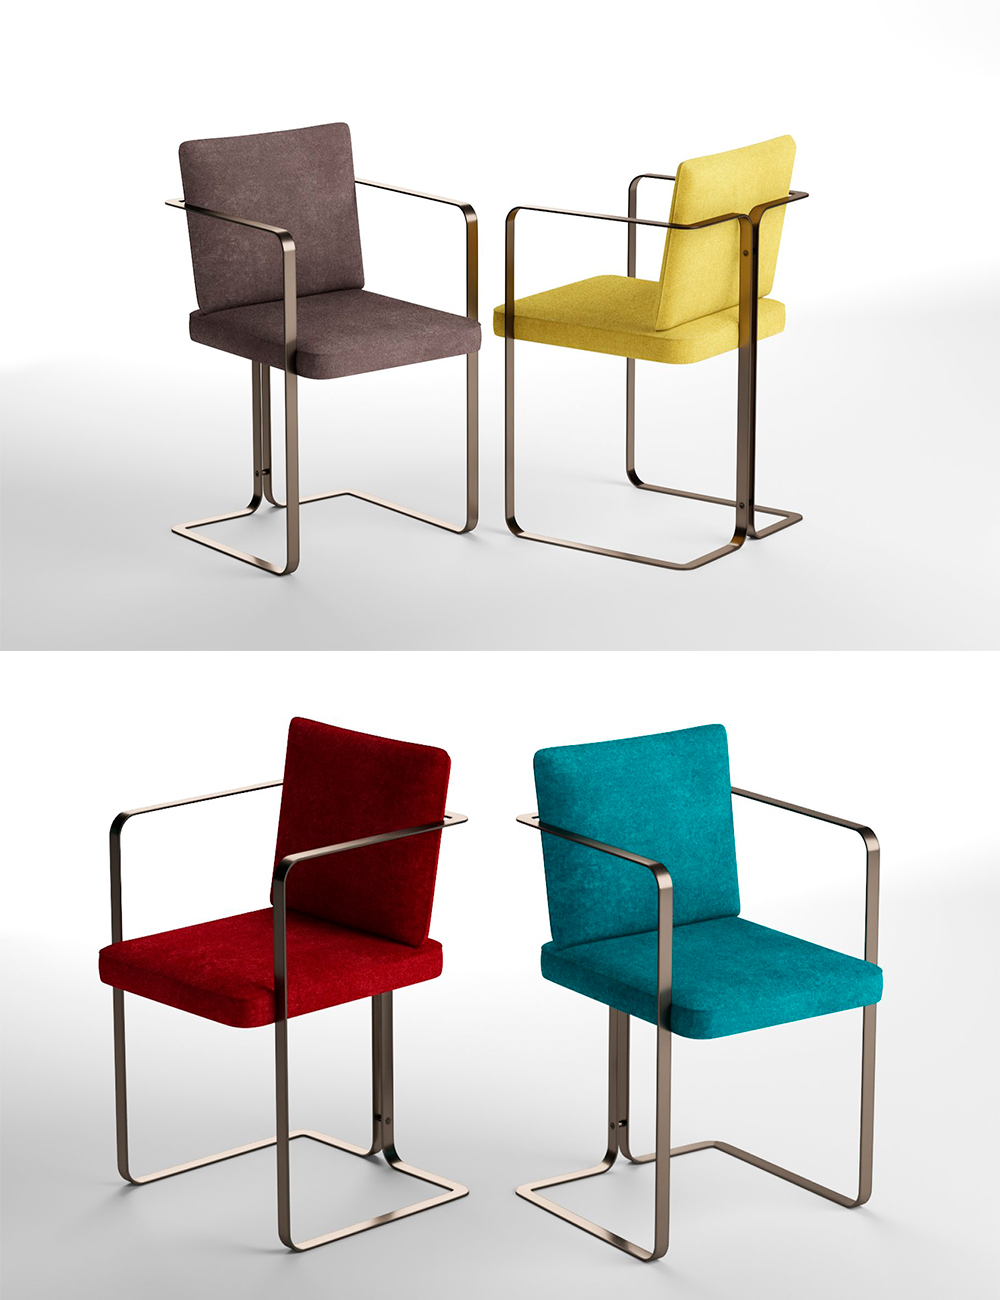 Rendering of a gorgeous 3d model of an armchair in various colors